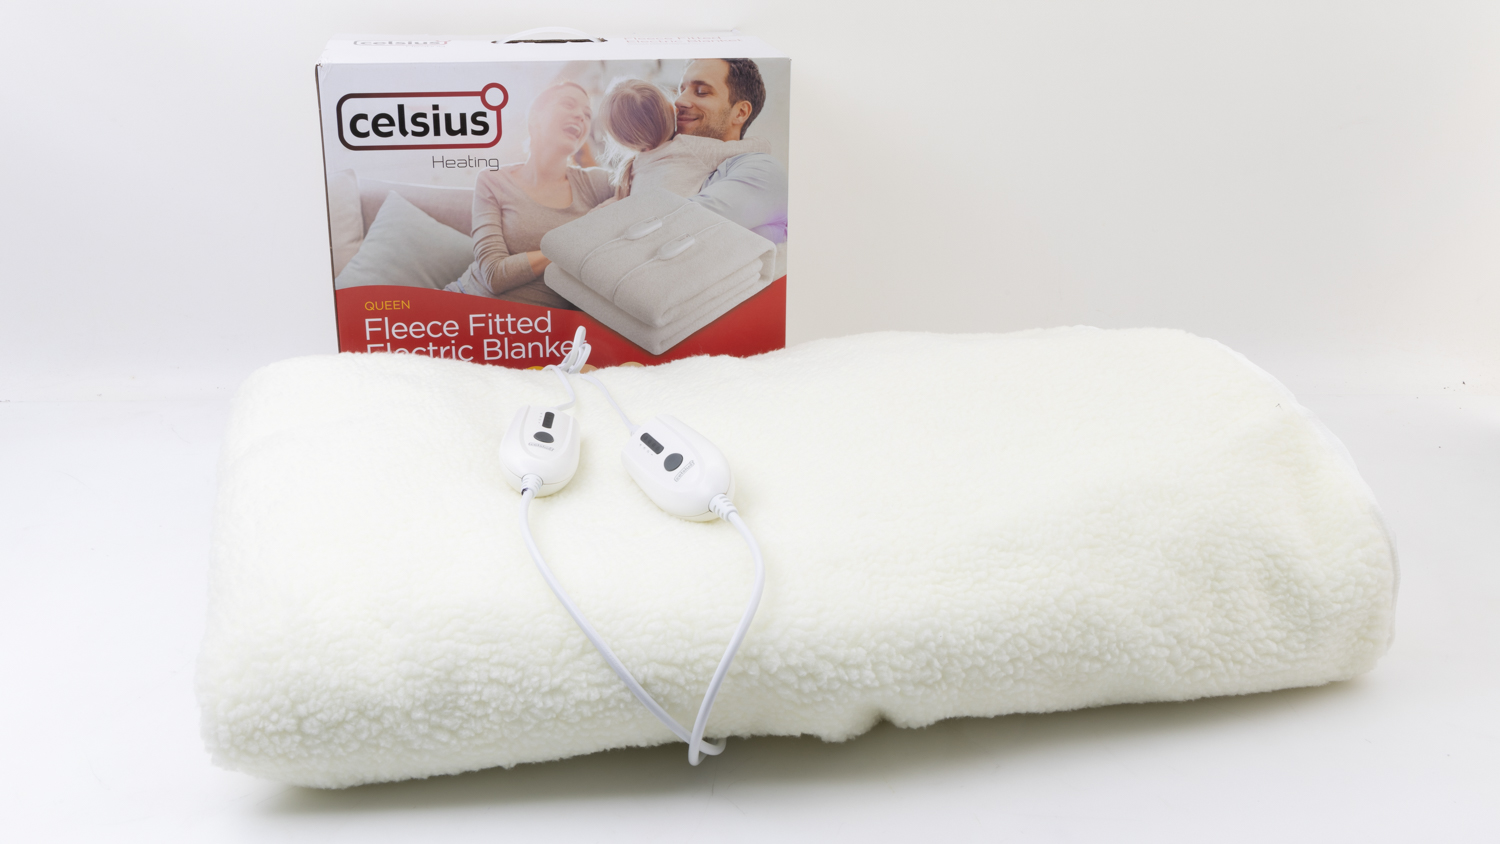 Celcius Fleece Fitted Electric Blanket CELEBFF-Q carousel image